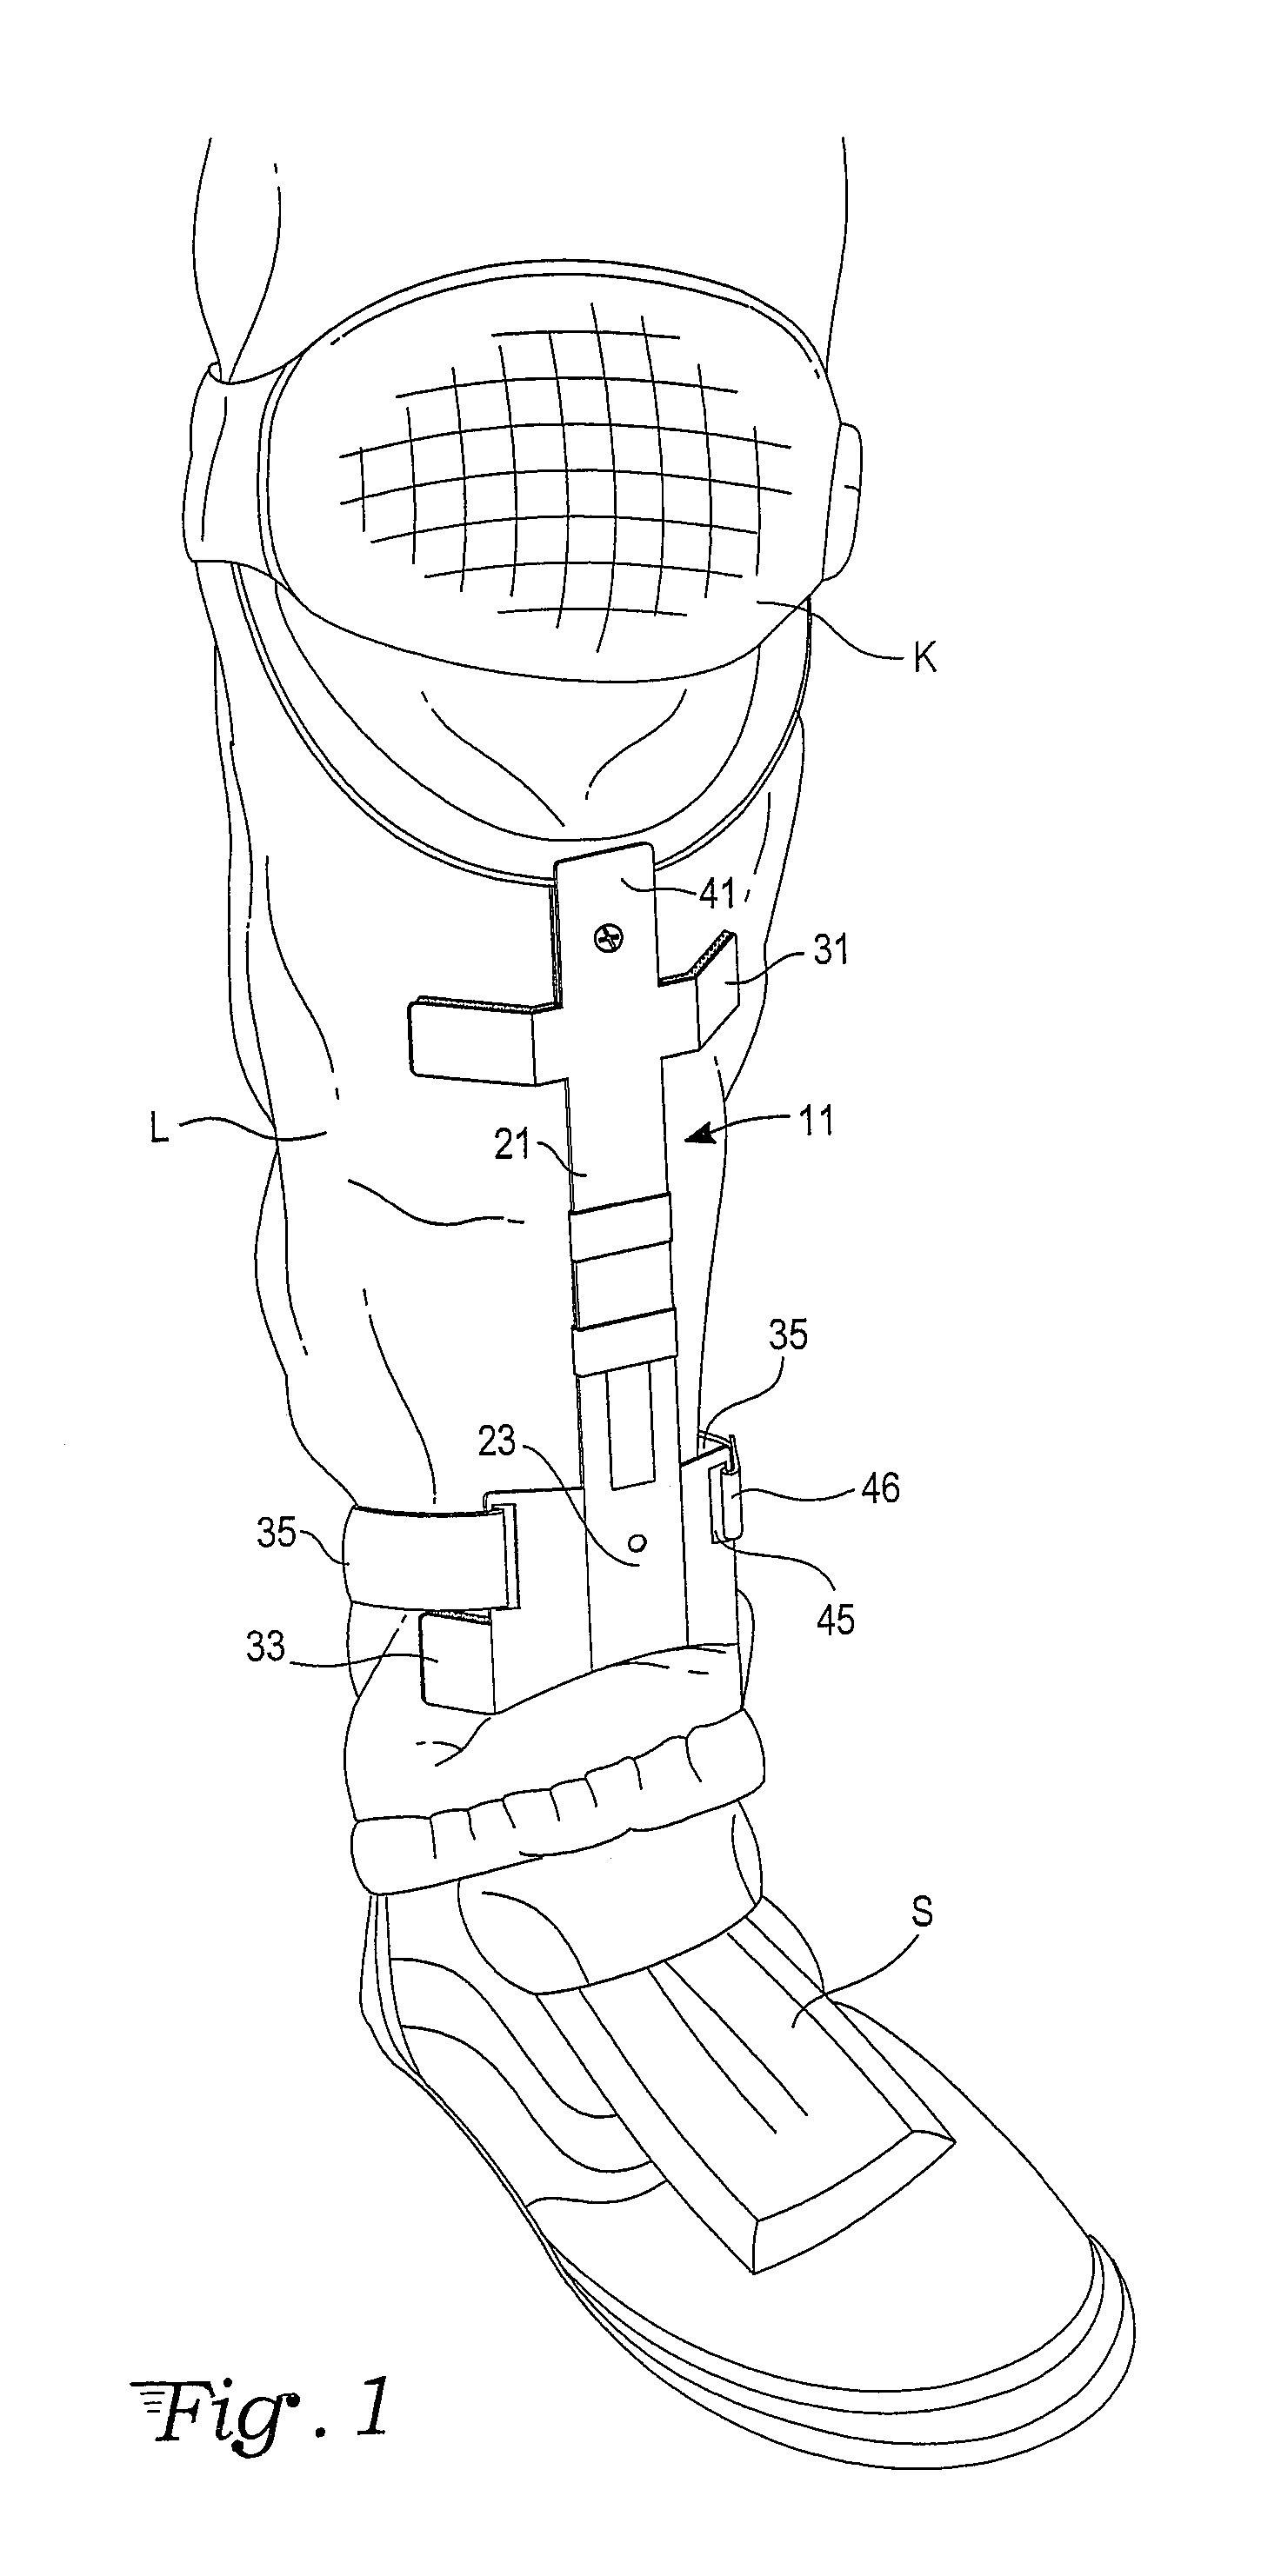 Positioning brace for a kneepad